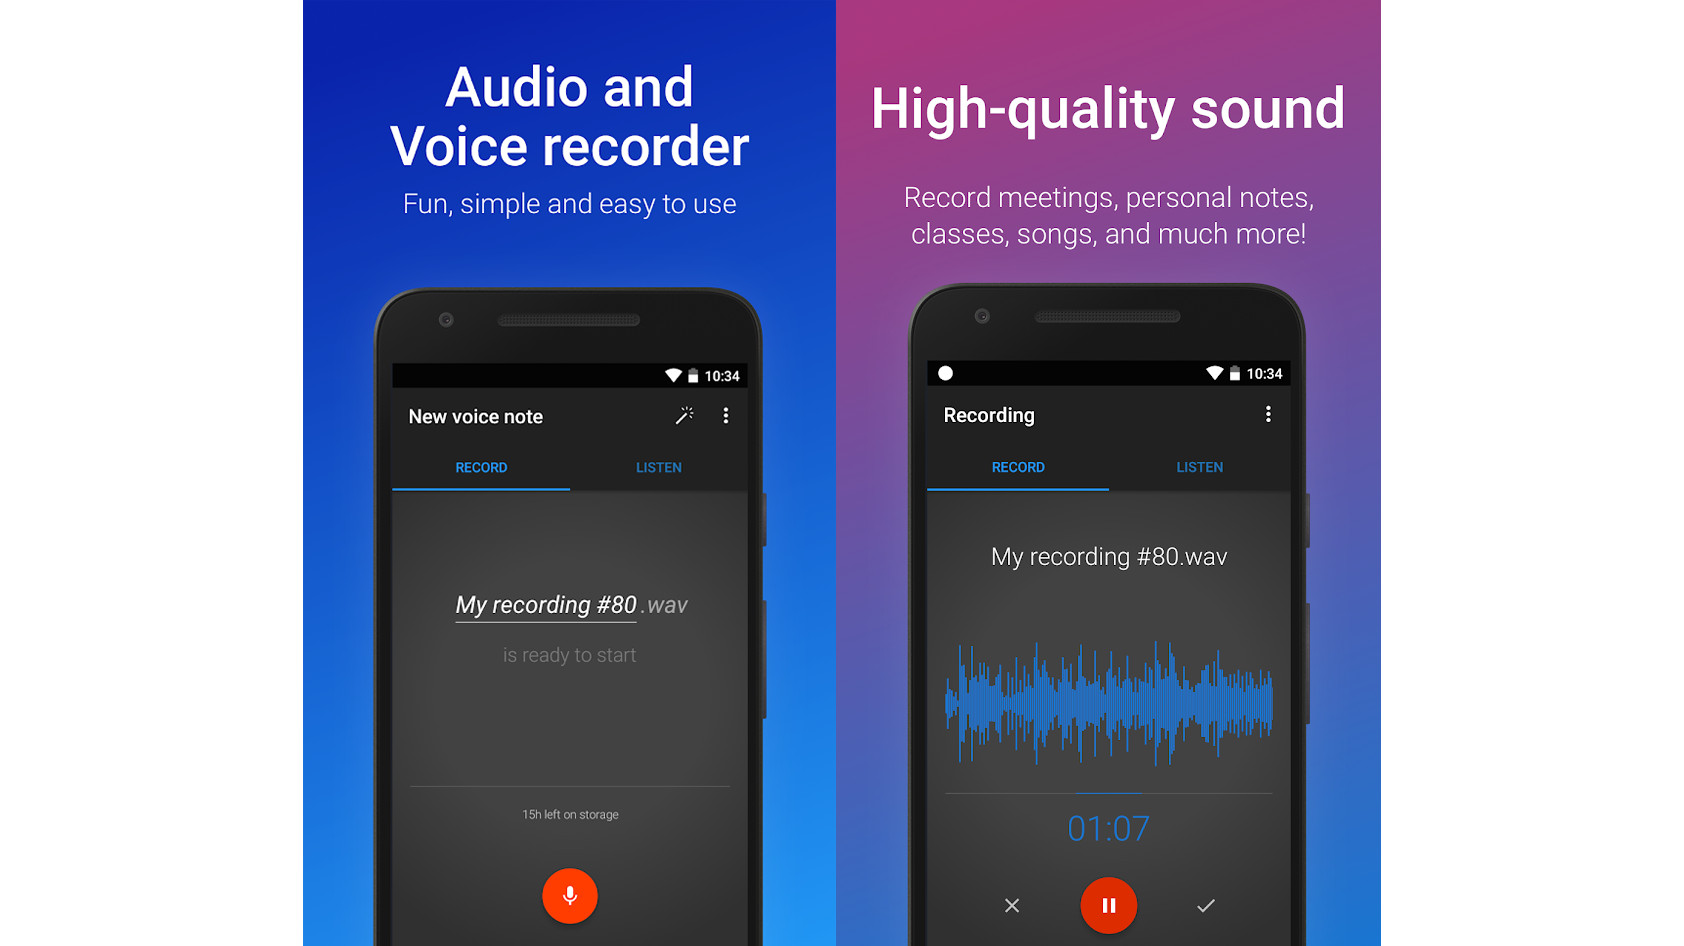 A screenshot of the Easy Voice Recorder interface with animated wave recordings.